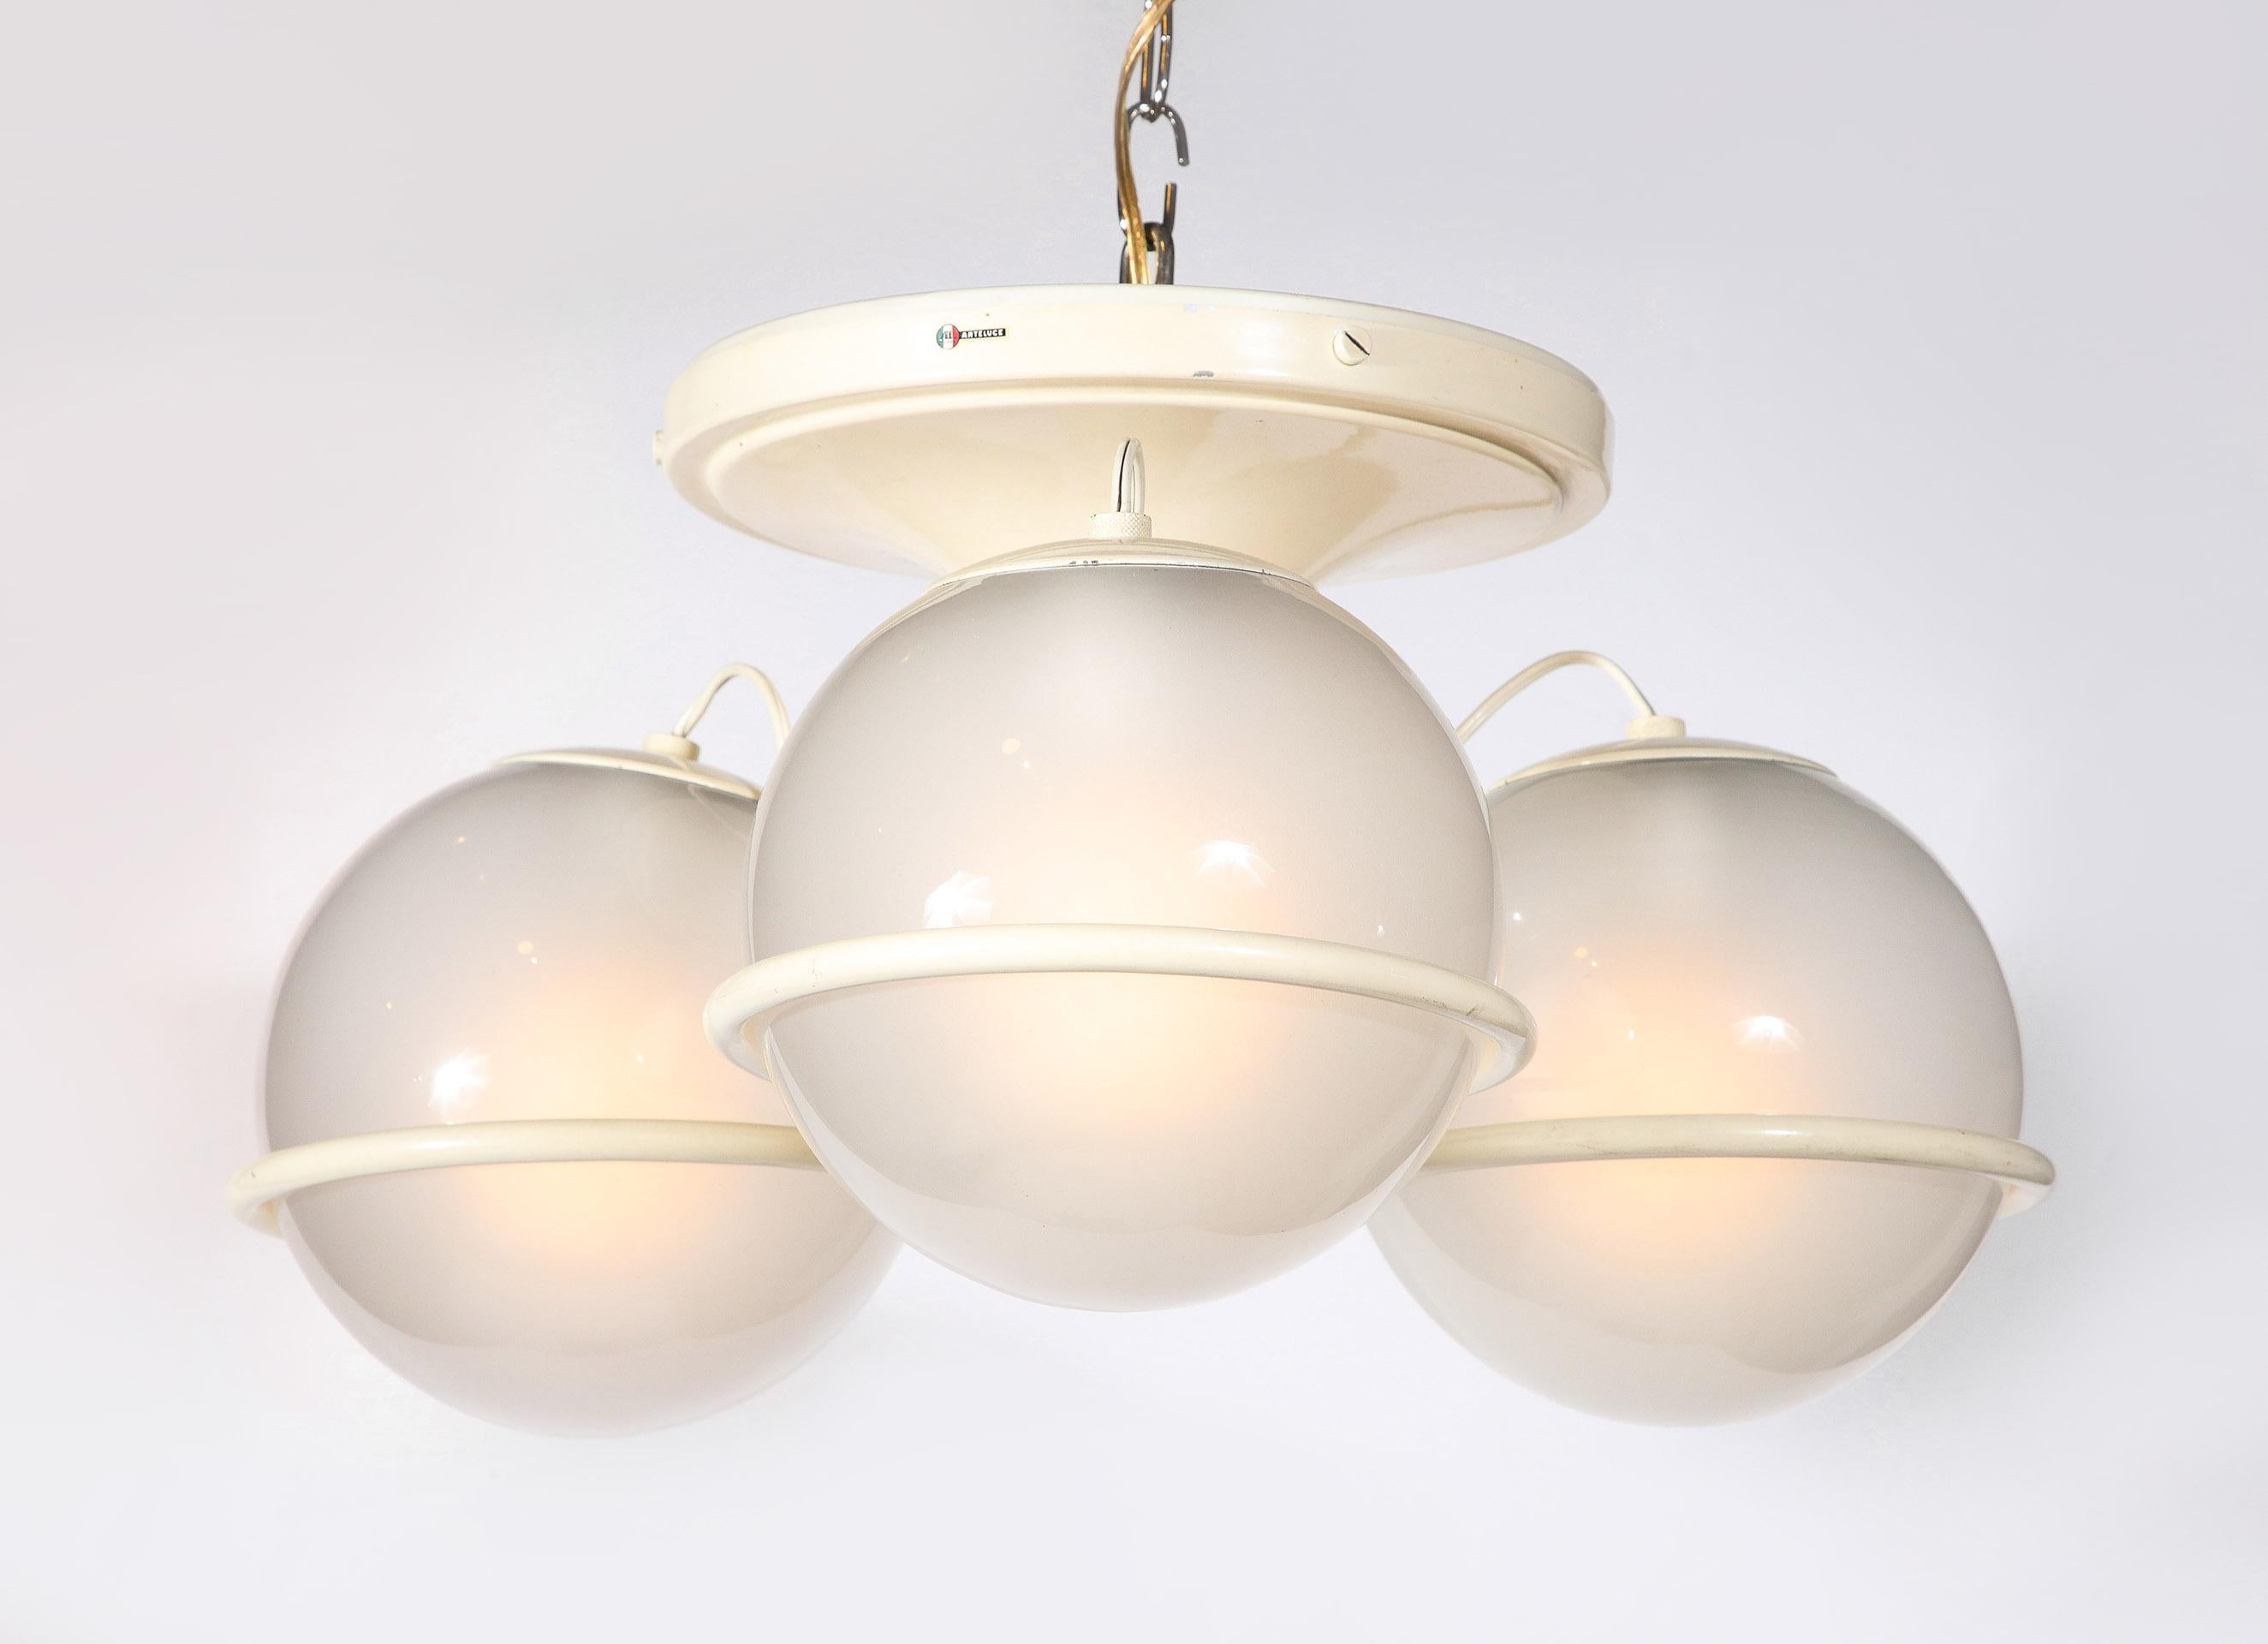 This ceiling light in the model 2042/3 was made by Arteluce Milano, designed by Gino Sarfatti. Condition is excellent and bares the original label of 